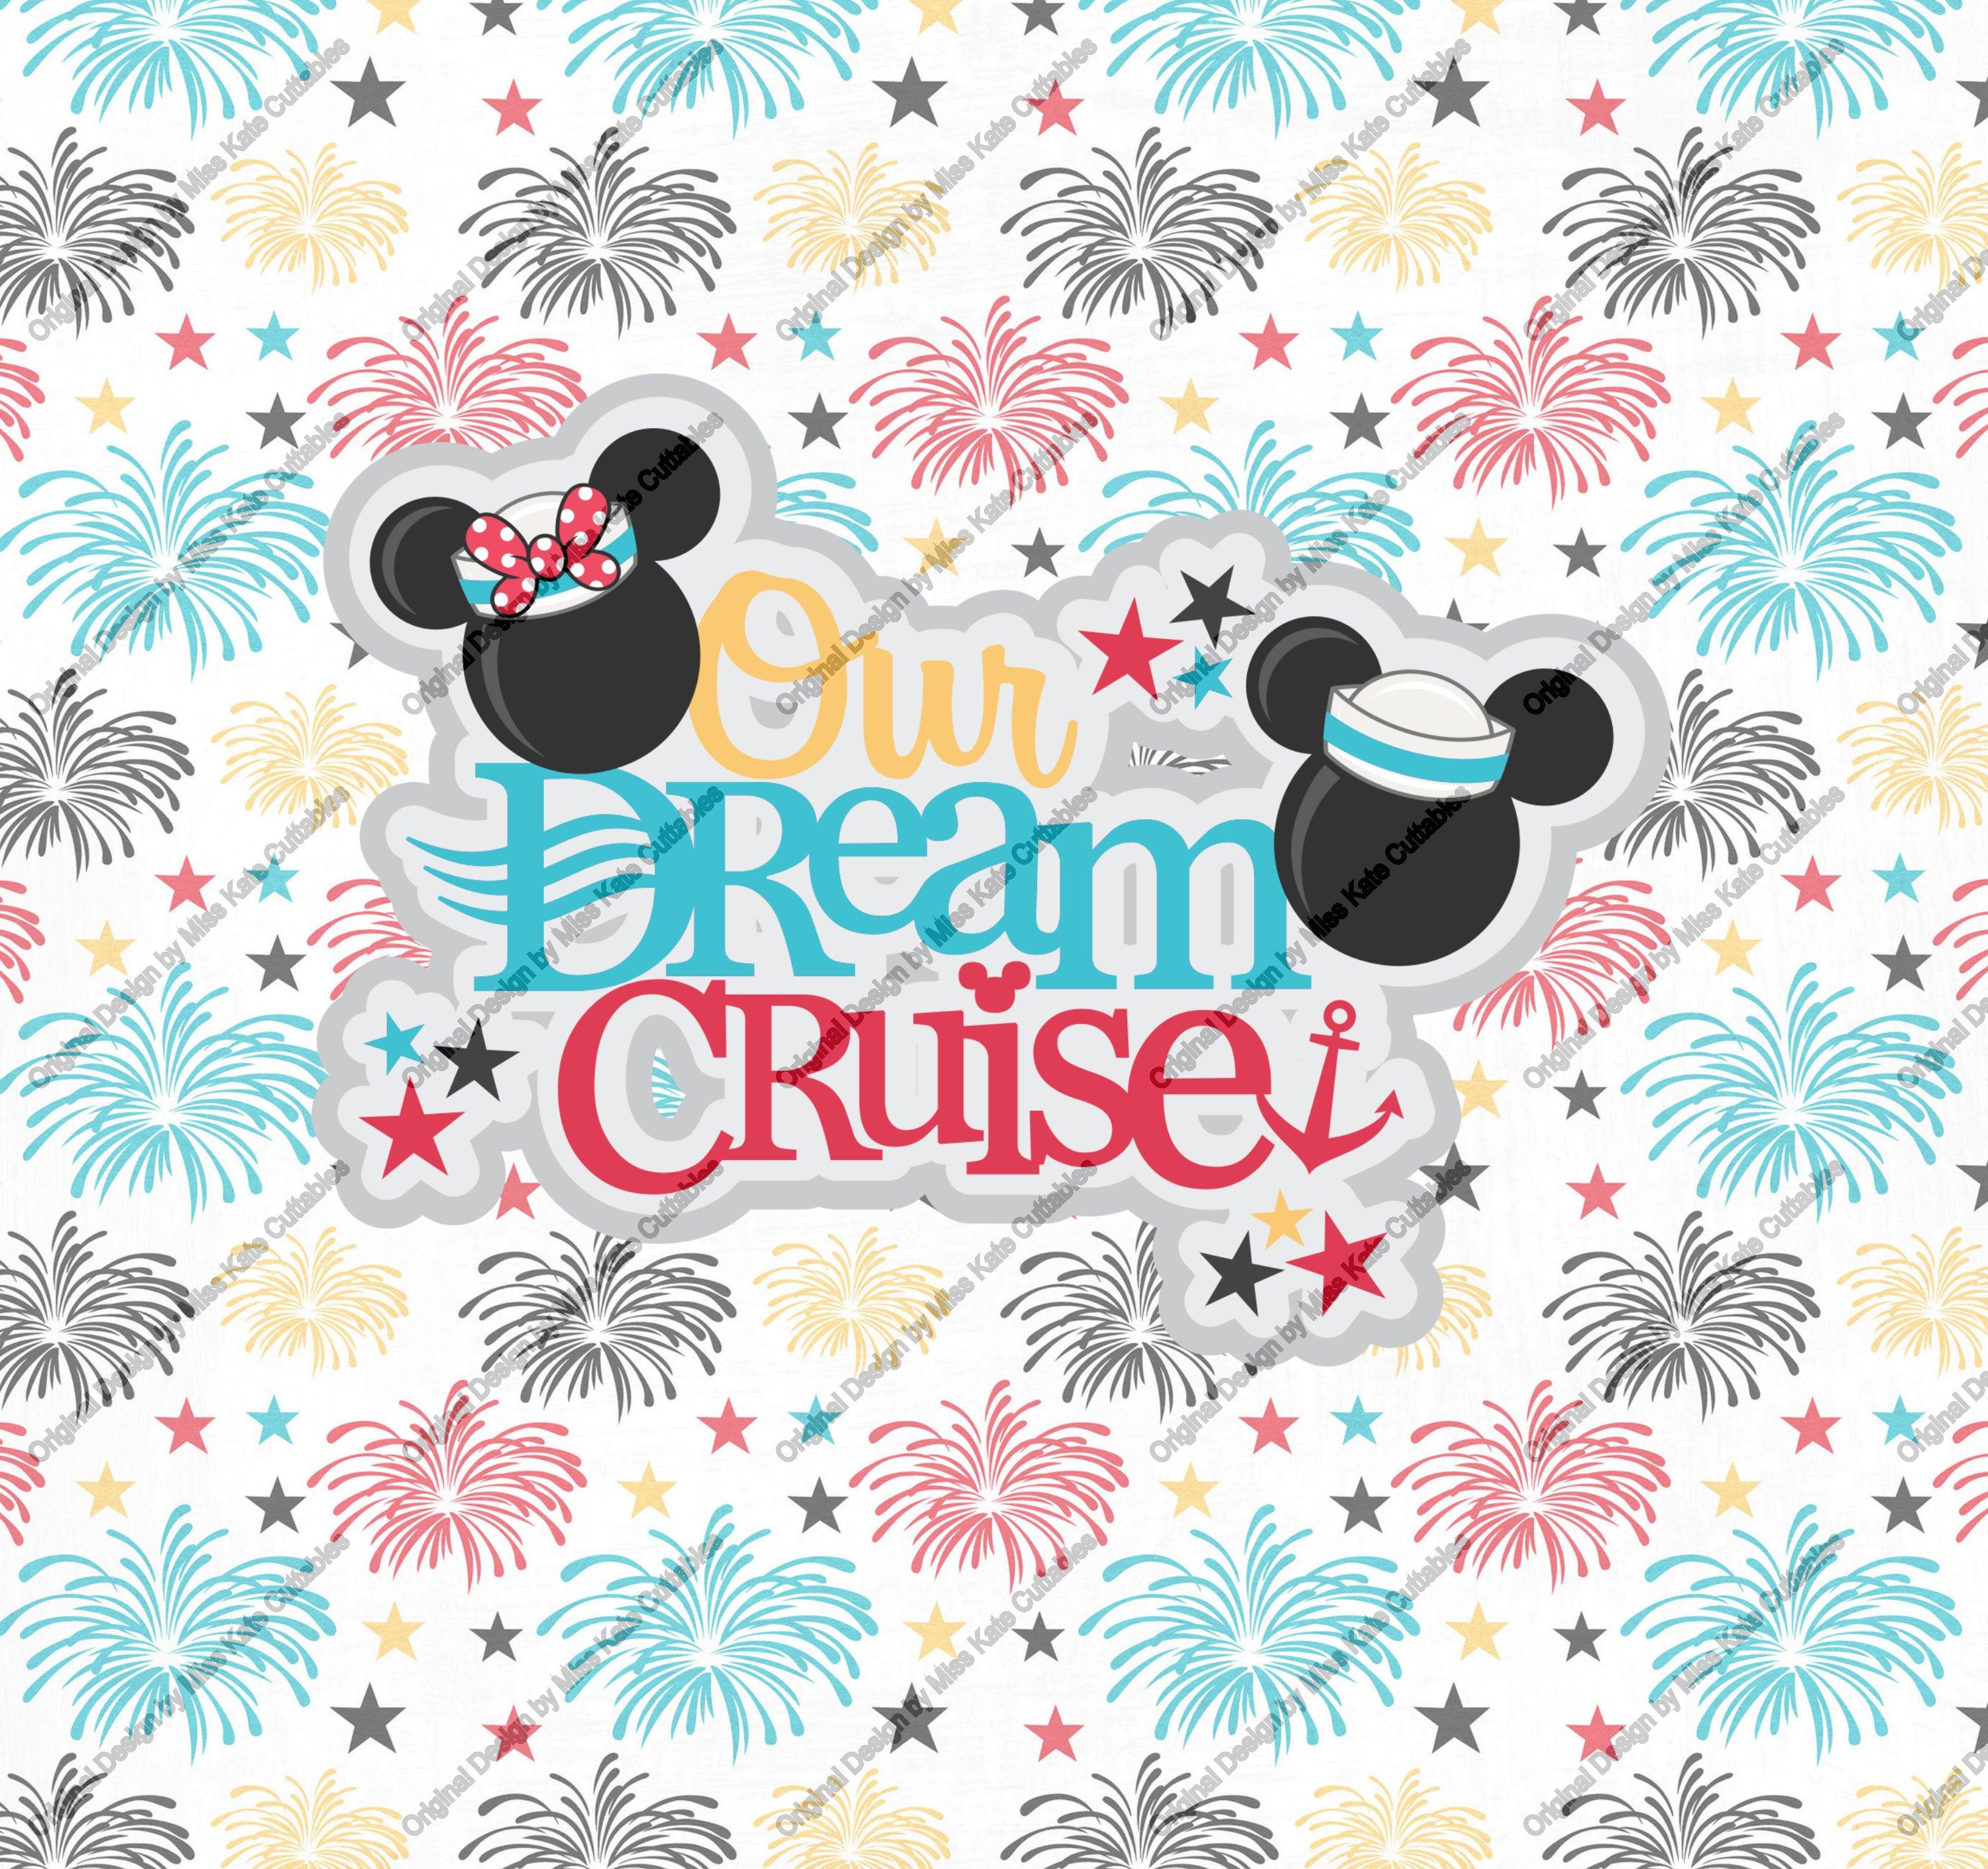 Disneyana Our Dream Cruise 30 oz. Straight Skinny Tumbler by SSC Designs - Scrapbook Supply Companies